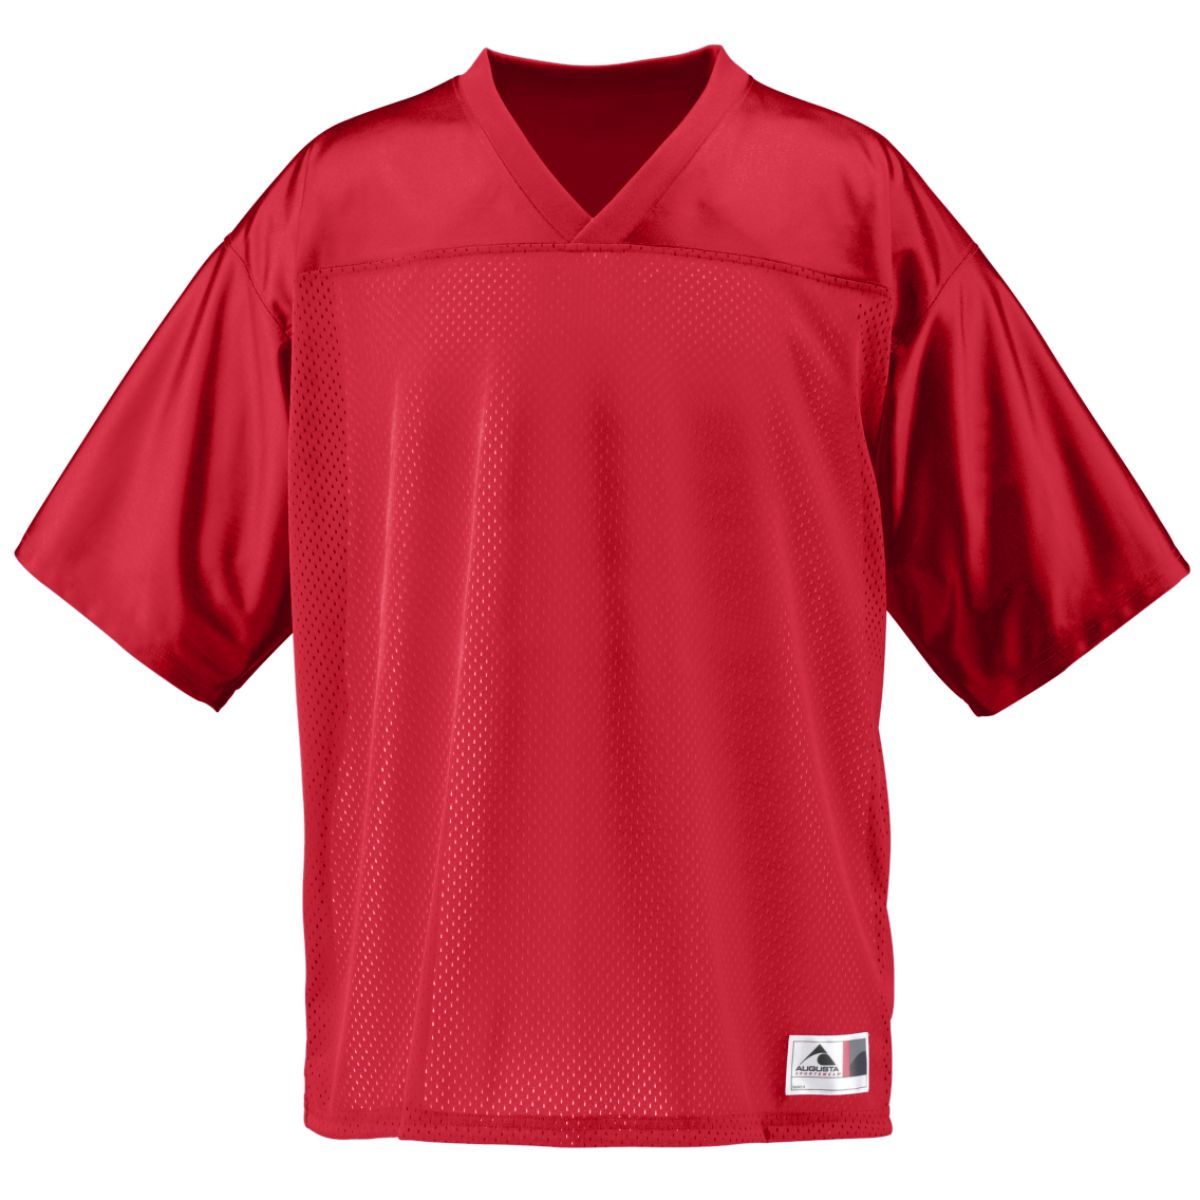 Augusta Sportswear Youth Stadium Replica Jersey in Red  -Part of the Youth, Youth-Jersey, Augusta-Products, Football, Shirts, All-Sports, All-Sports-1 product lines at KanaleyCreations.com